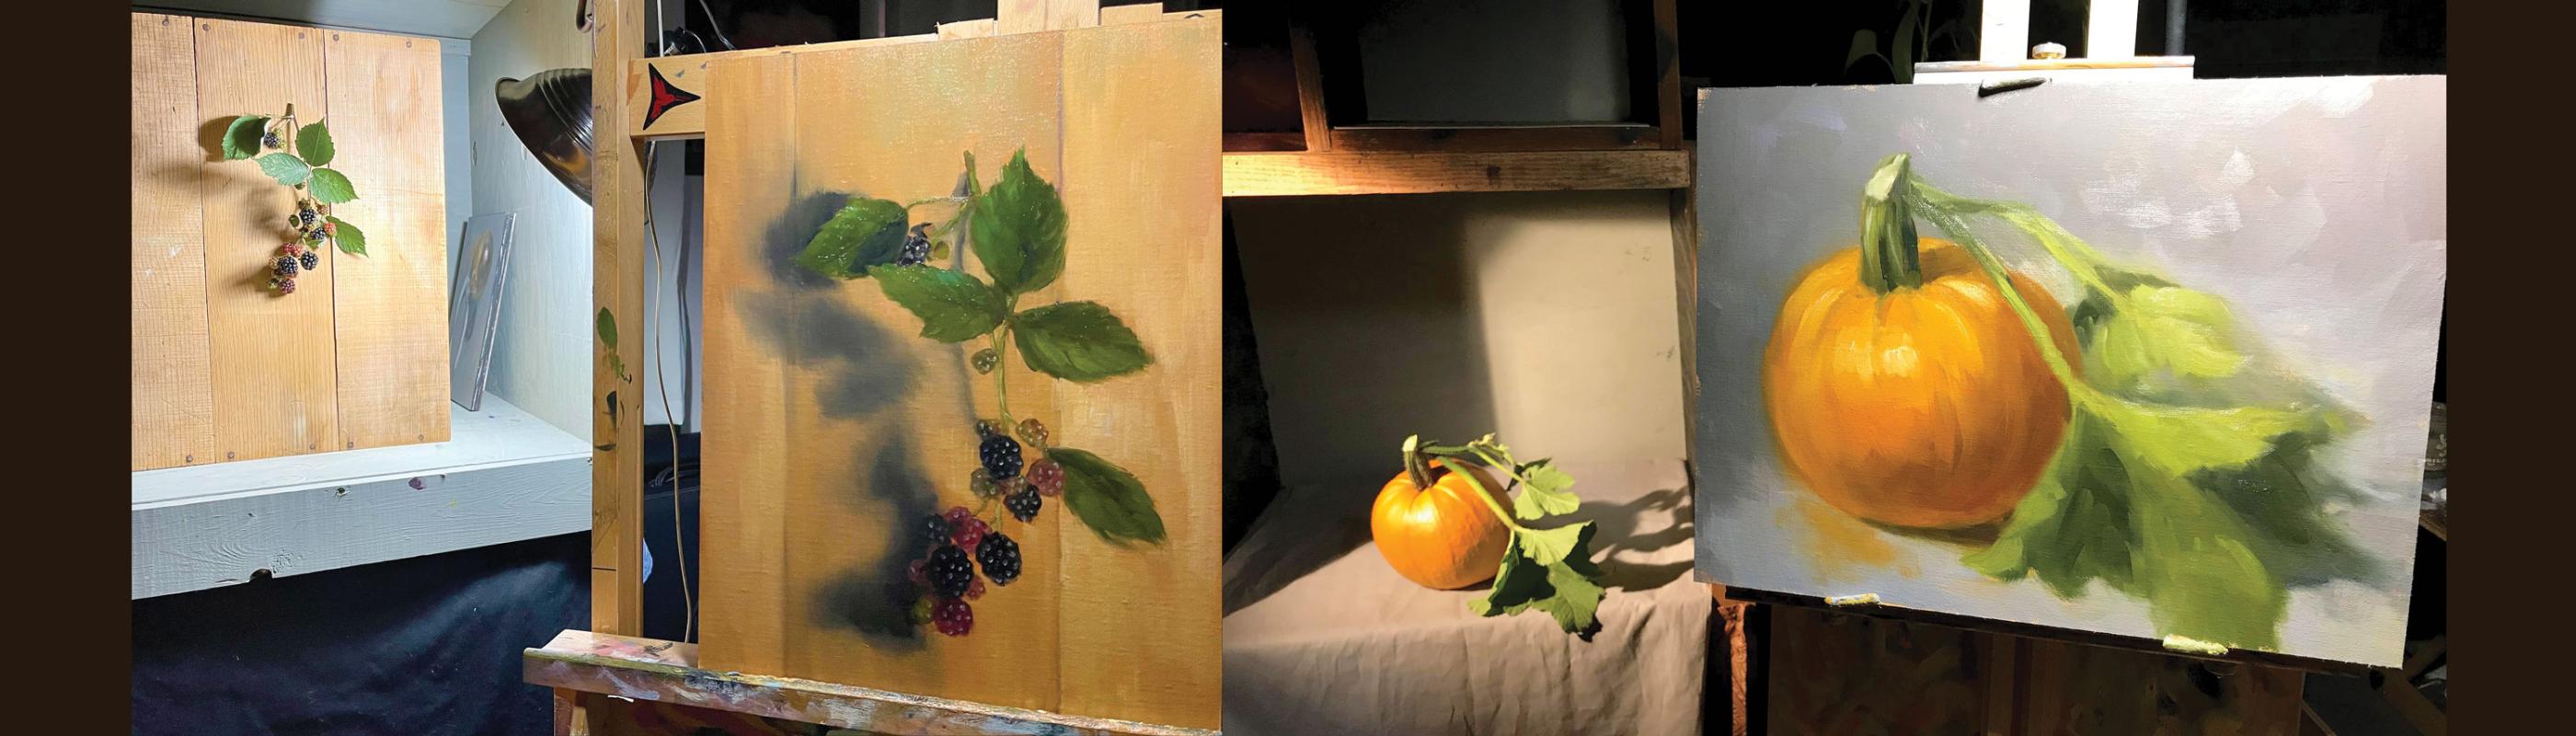 Still life paintings of black berries on a vine and a pumpkin